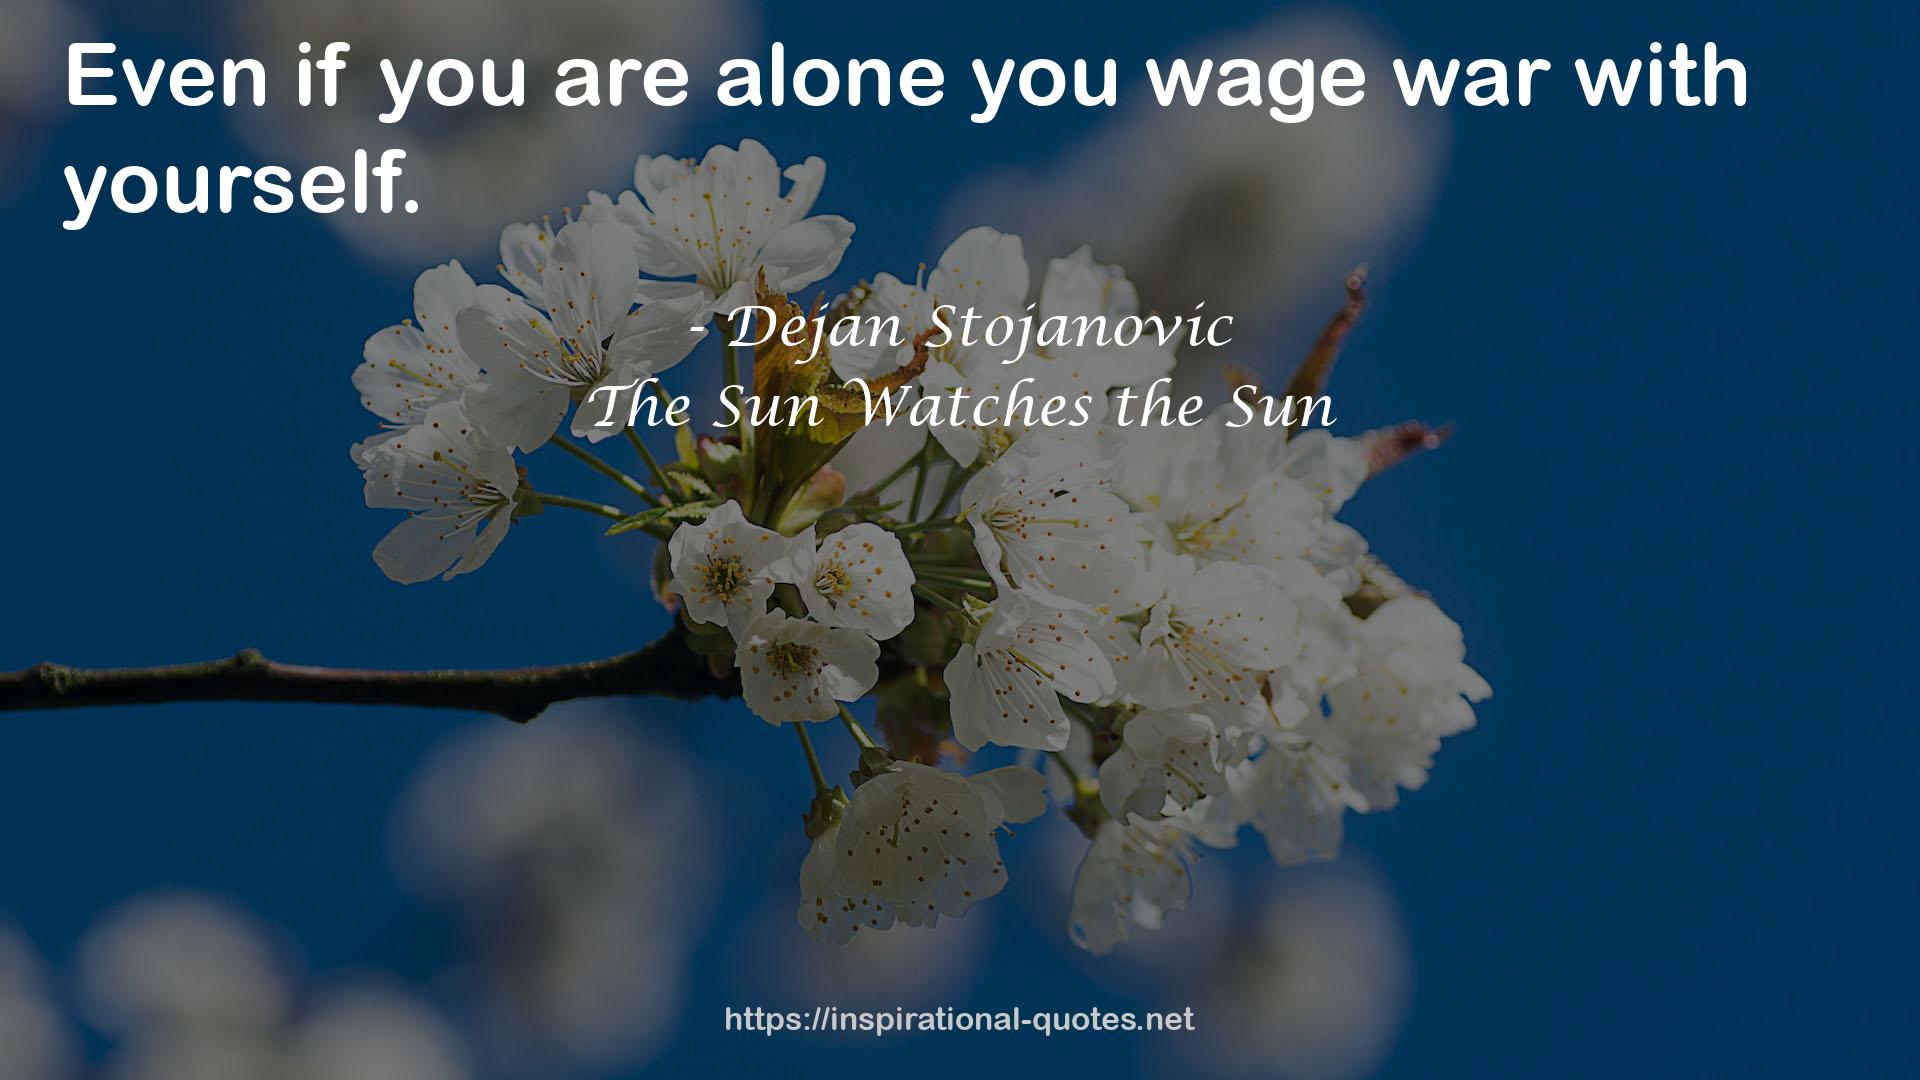 The Sun Watches the Sun QUOTES